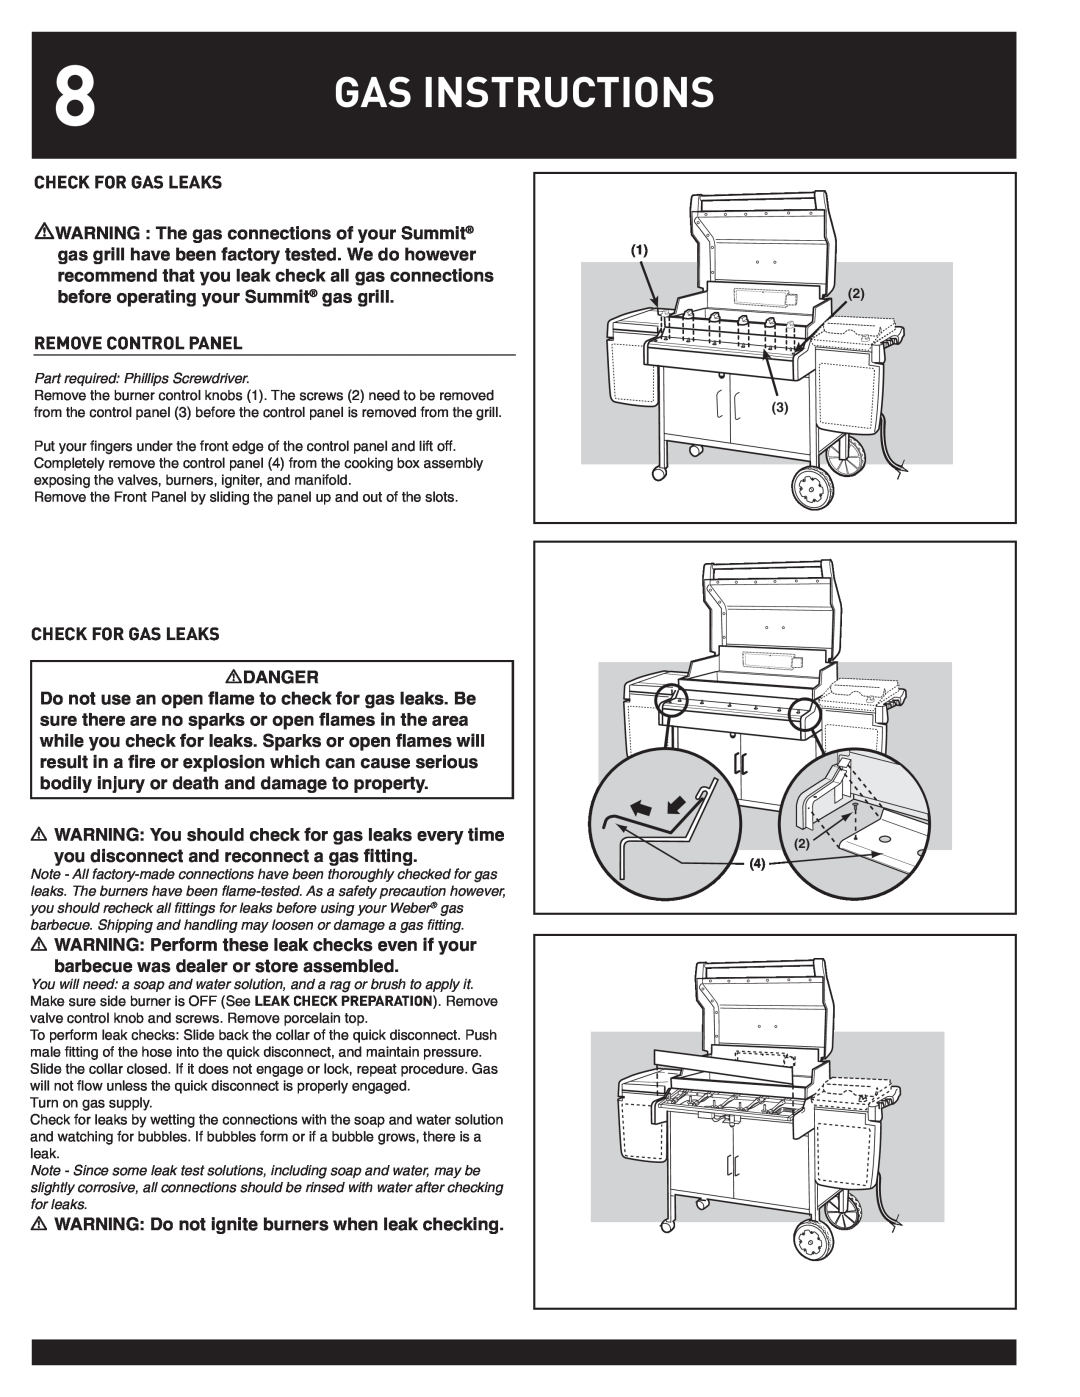 Weber 38044 manual Gas Instructions 